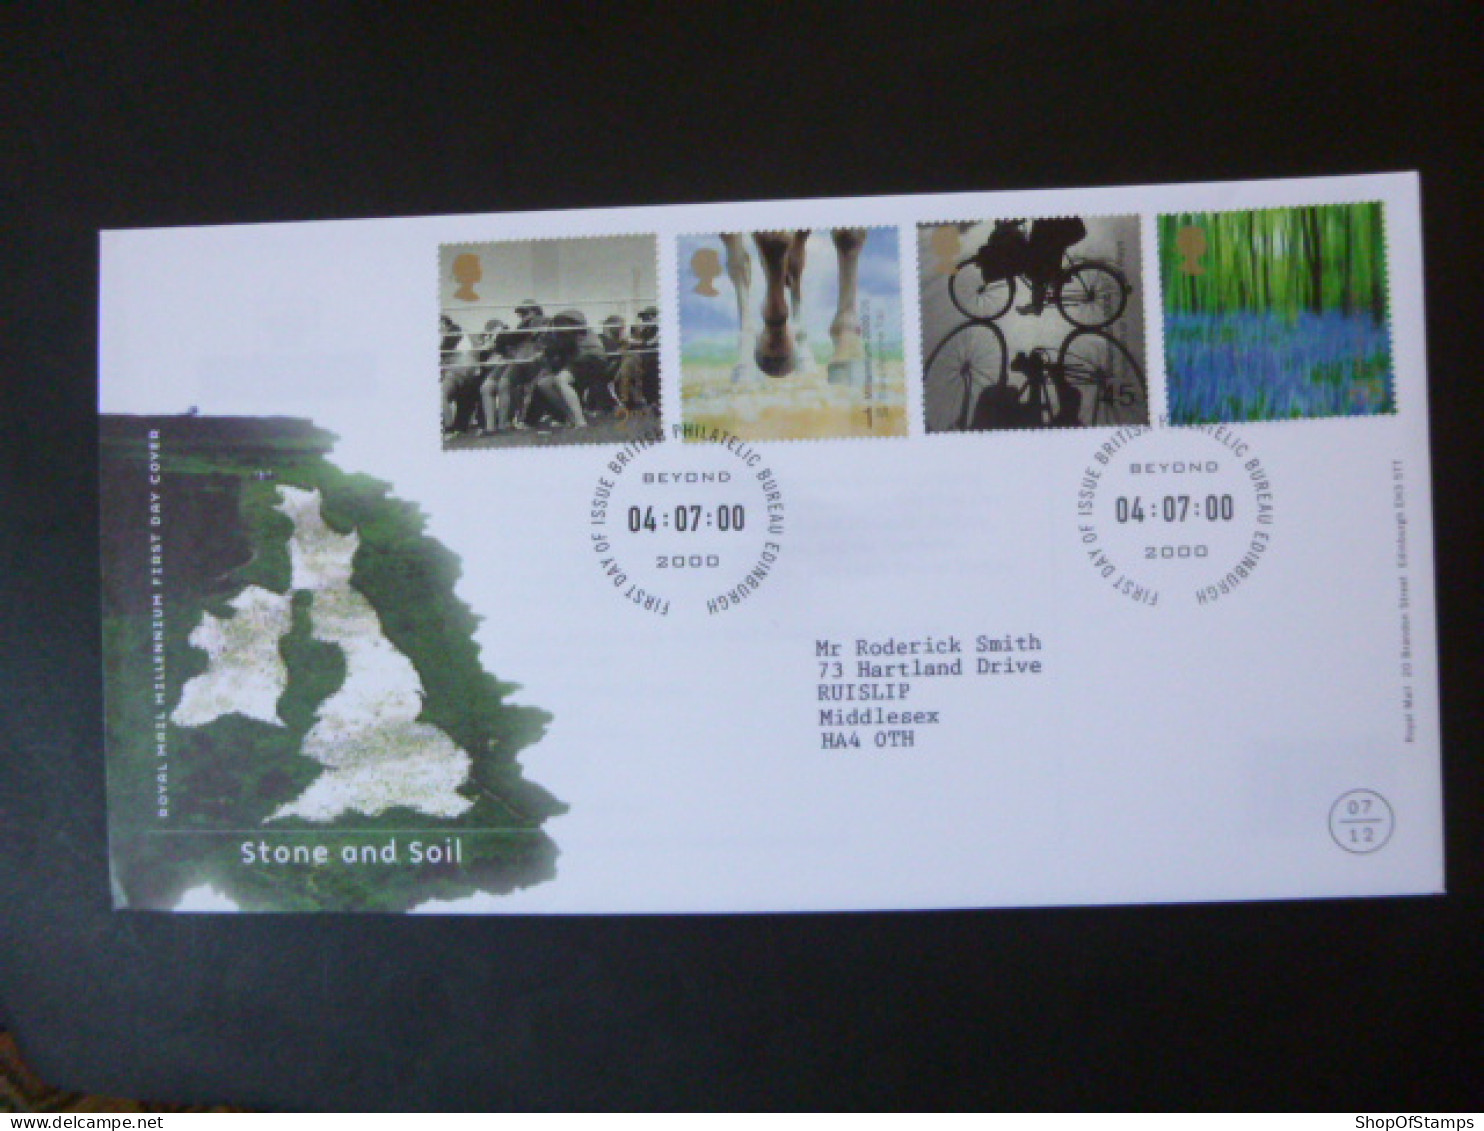 GREAT BRITAIN SG 2152-55  MILLENIUM PROJECTS, STONE AND SOIL FDC EDINBURGH - Unclassified